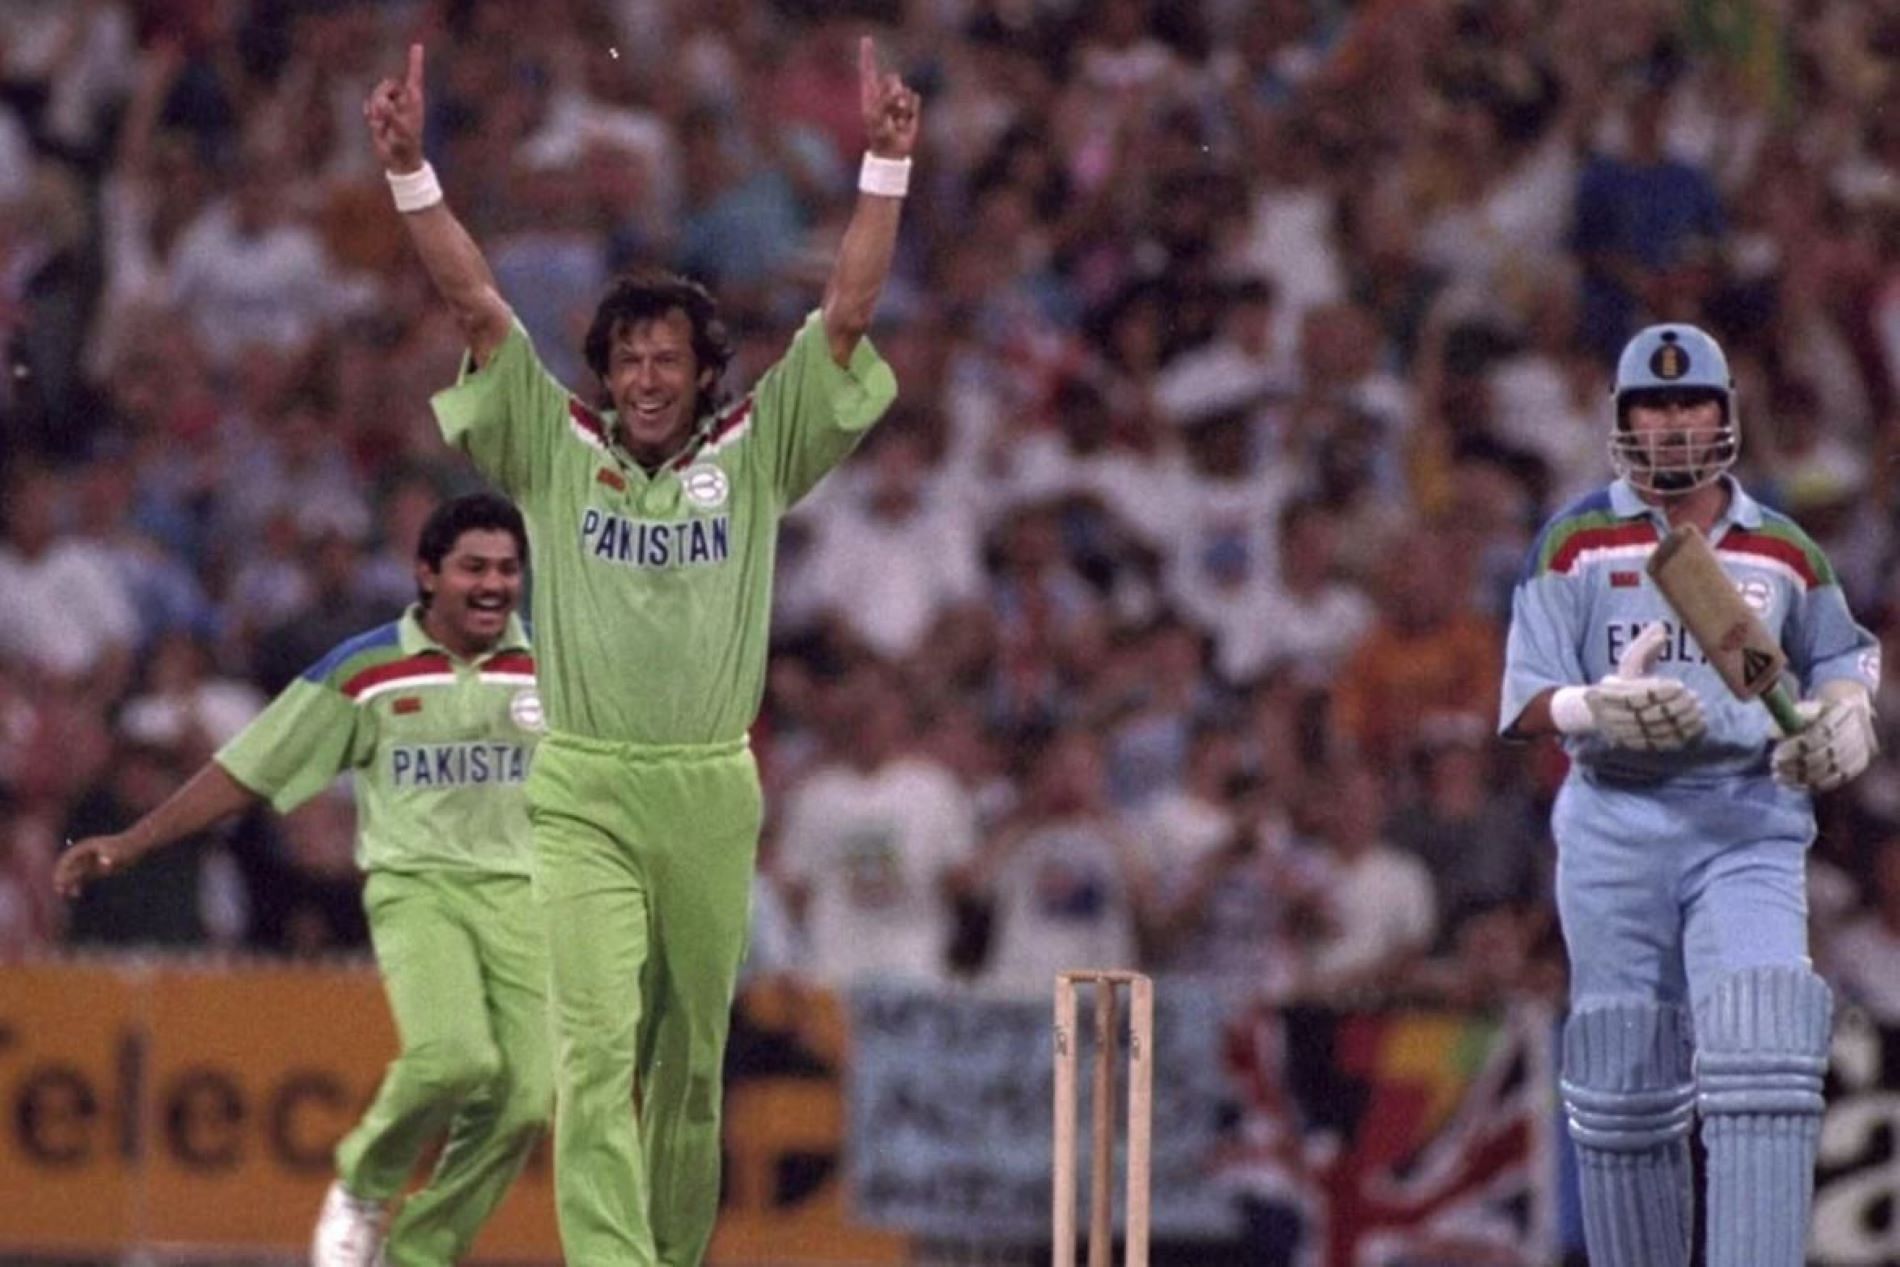 Imran Khan picked up the final wicket of the 1992 World Cup final.